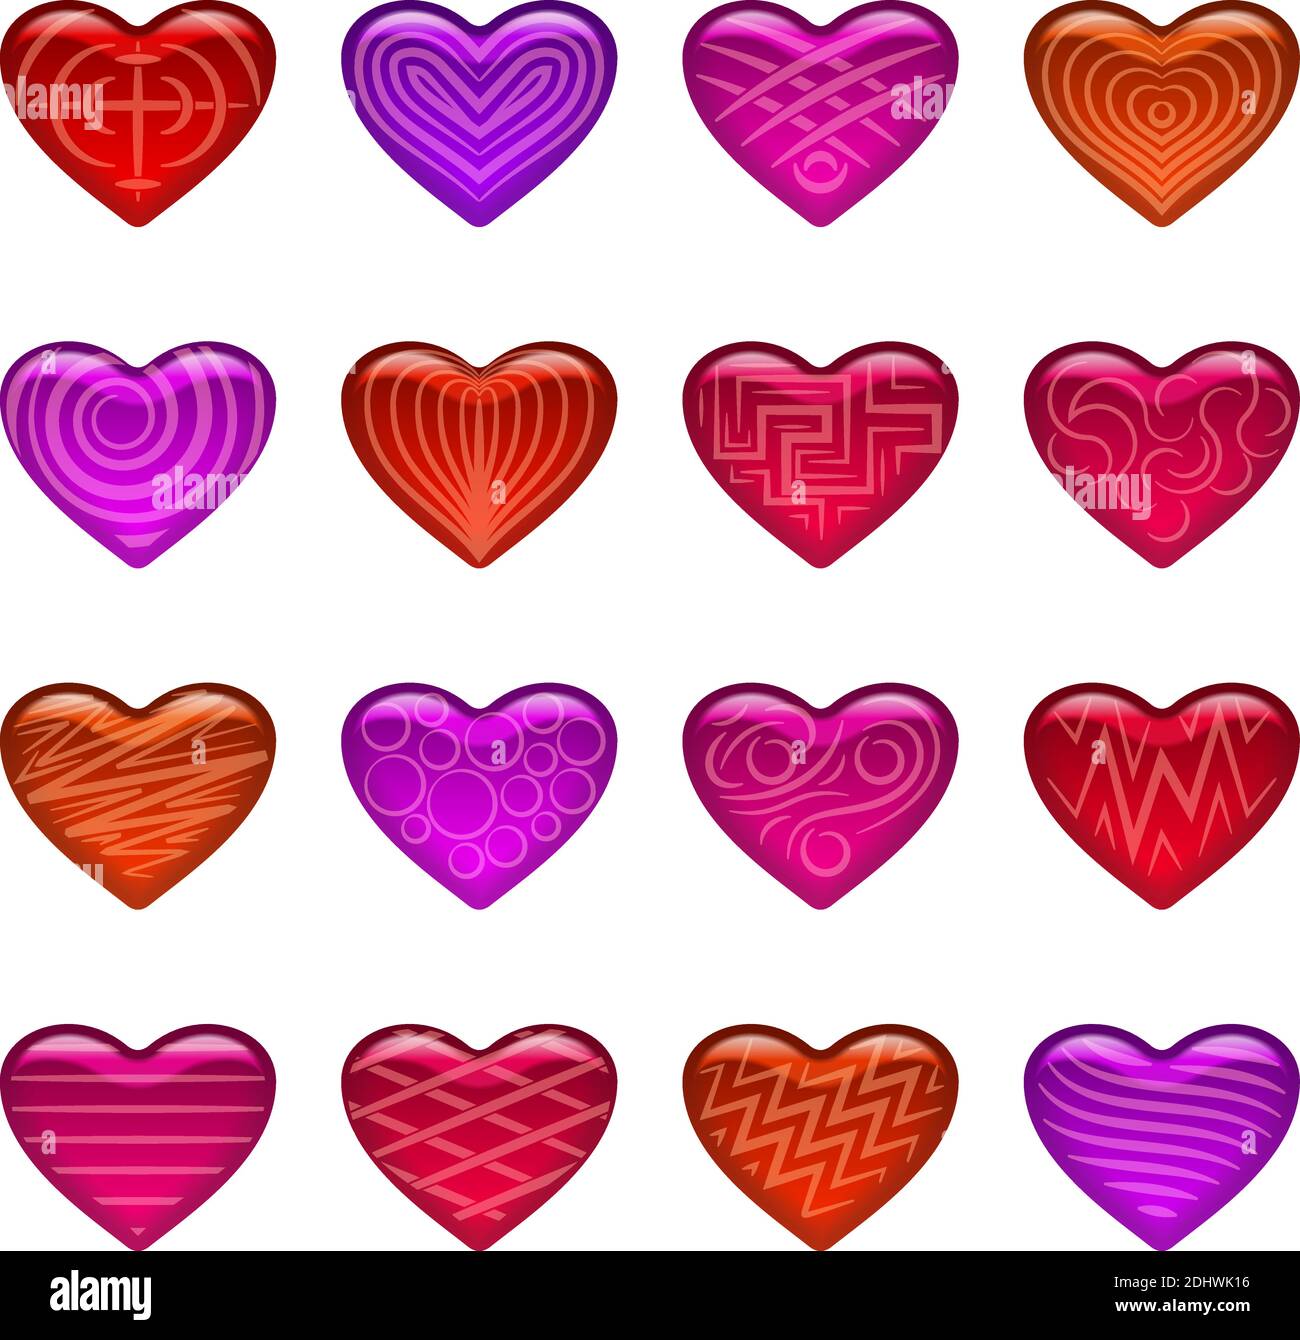 Set of Multicolored Valentine Hearts with Different Patterns, Love Symbols. Vector Stock Vector